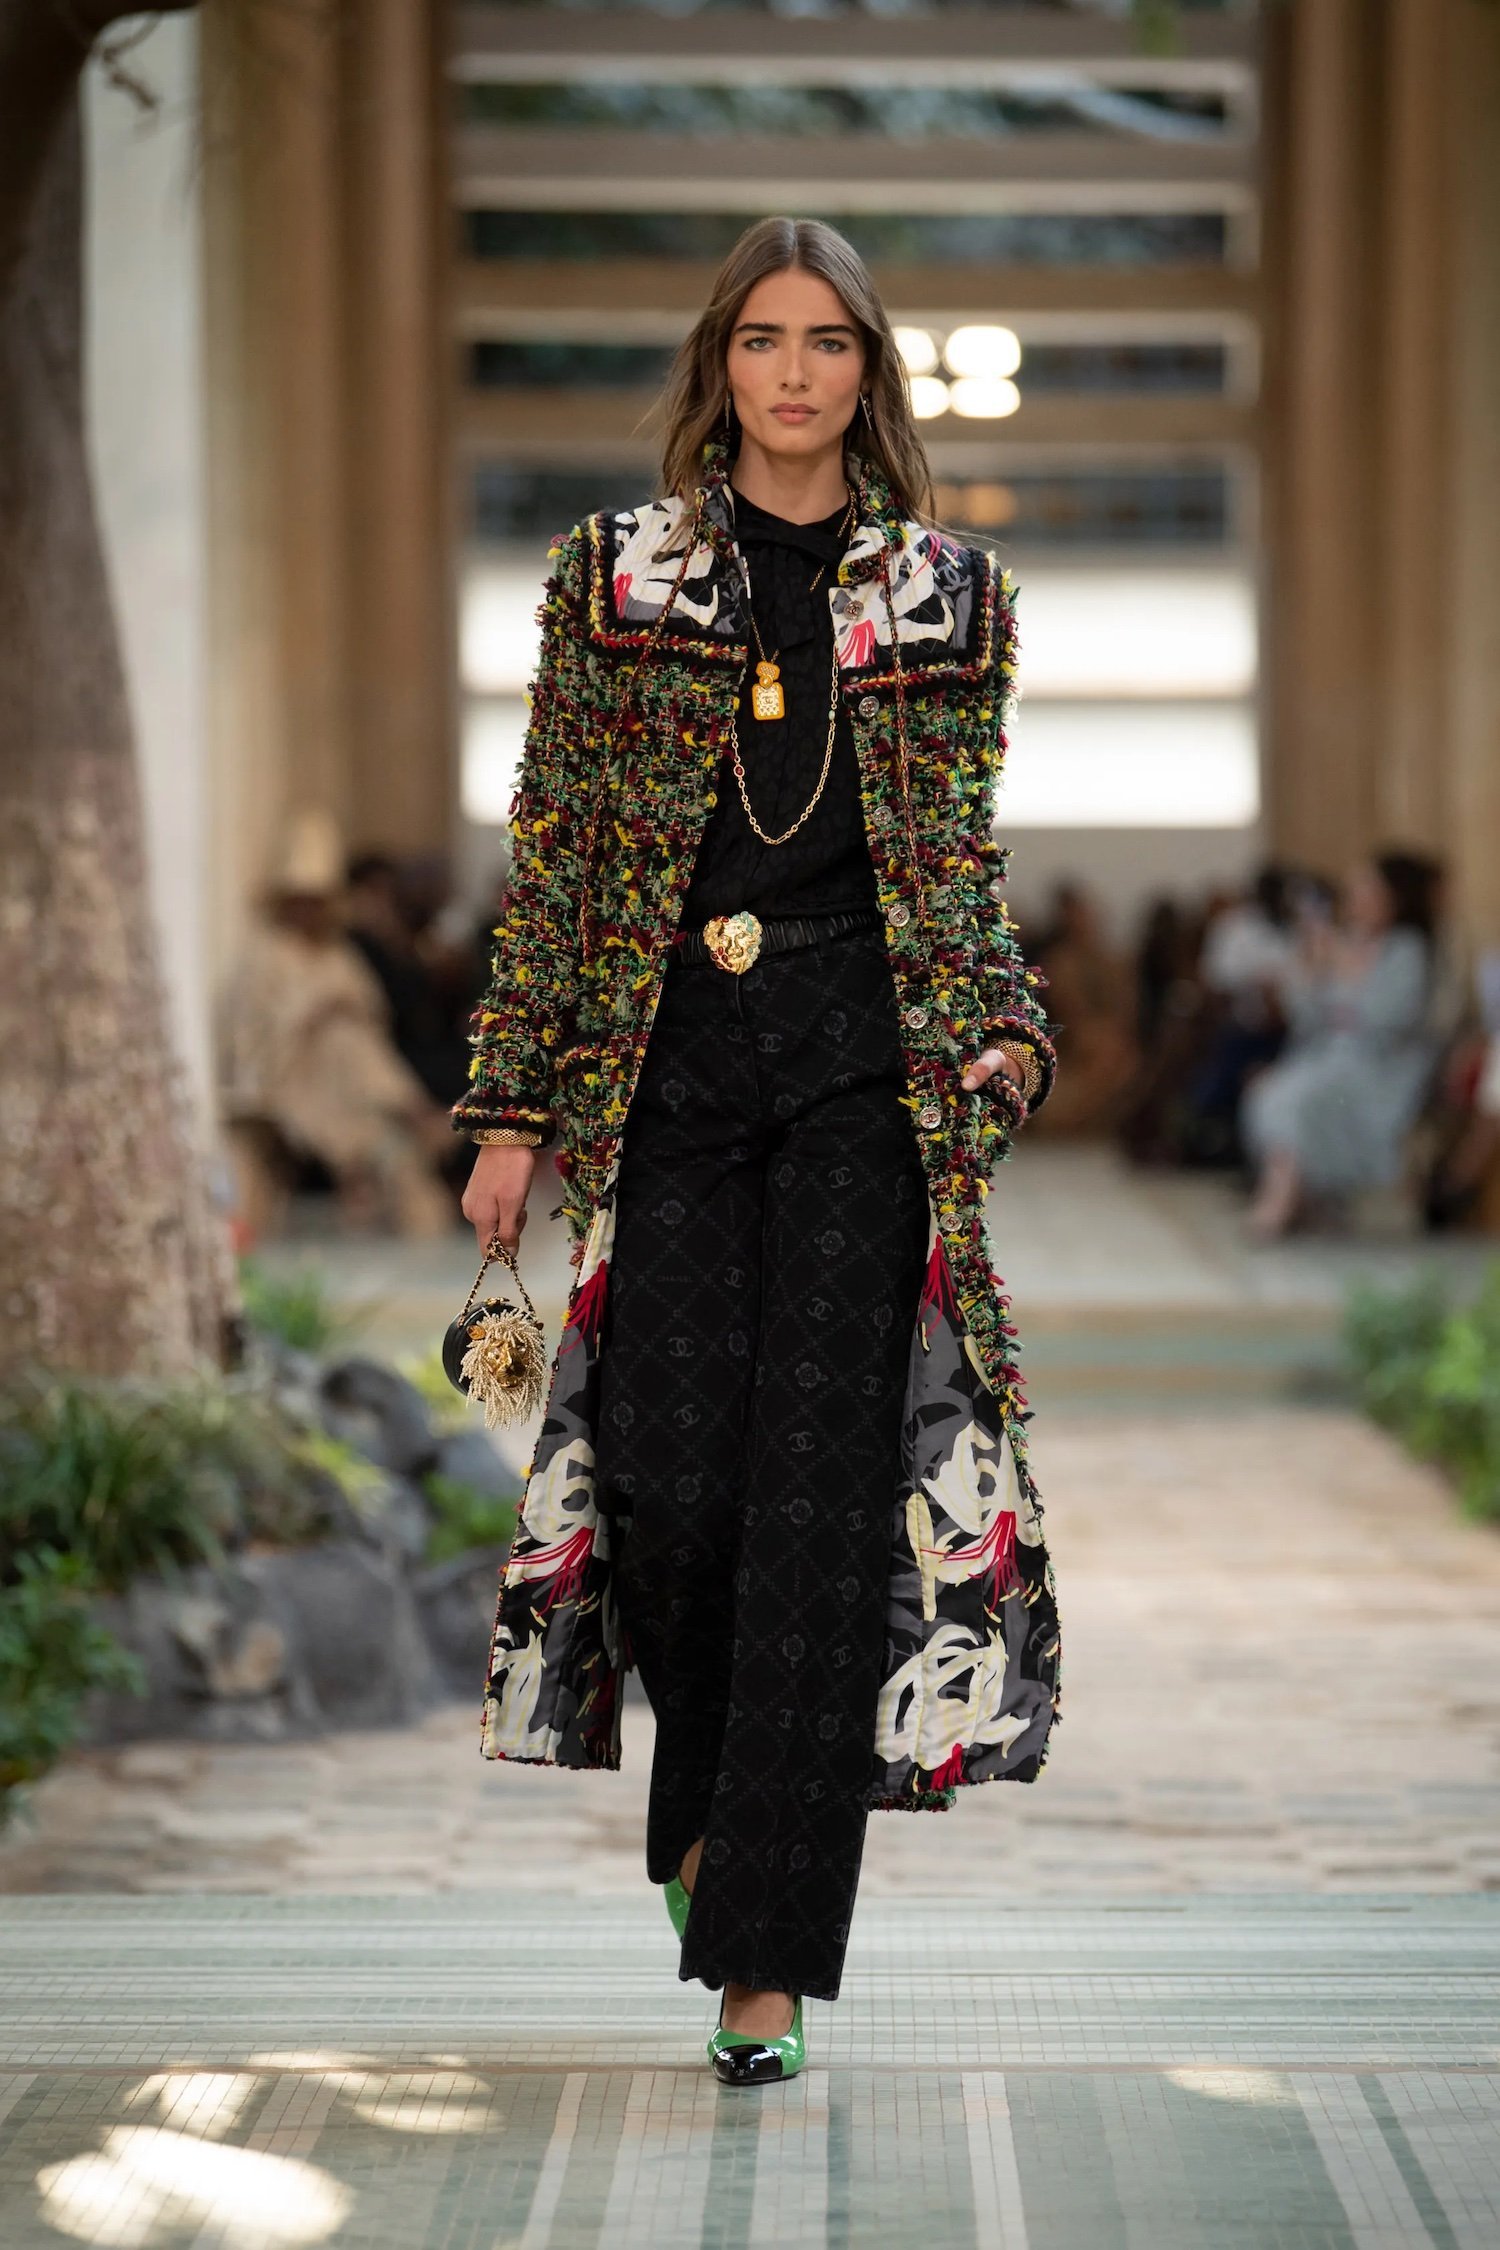 Chanel Metiers d'Art and Fashion Runway Bags